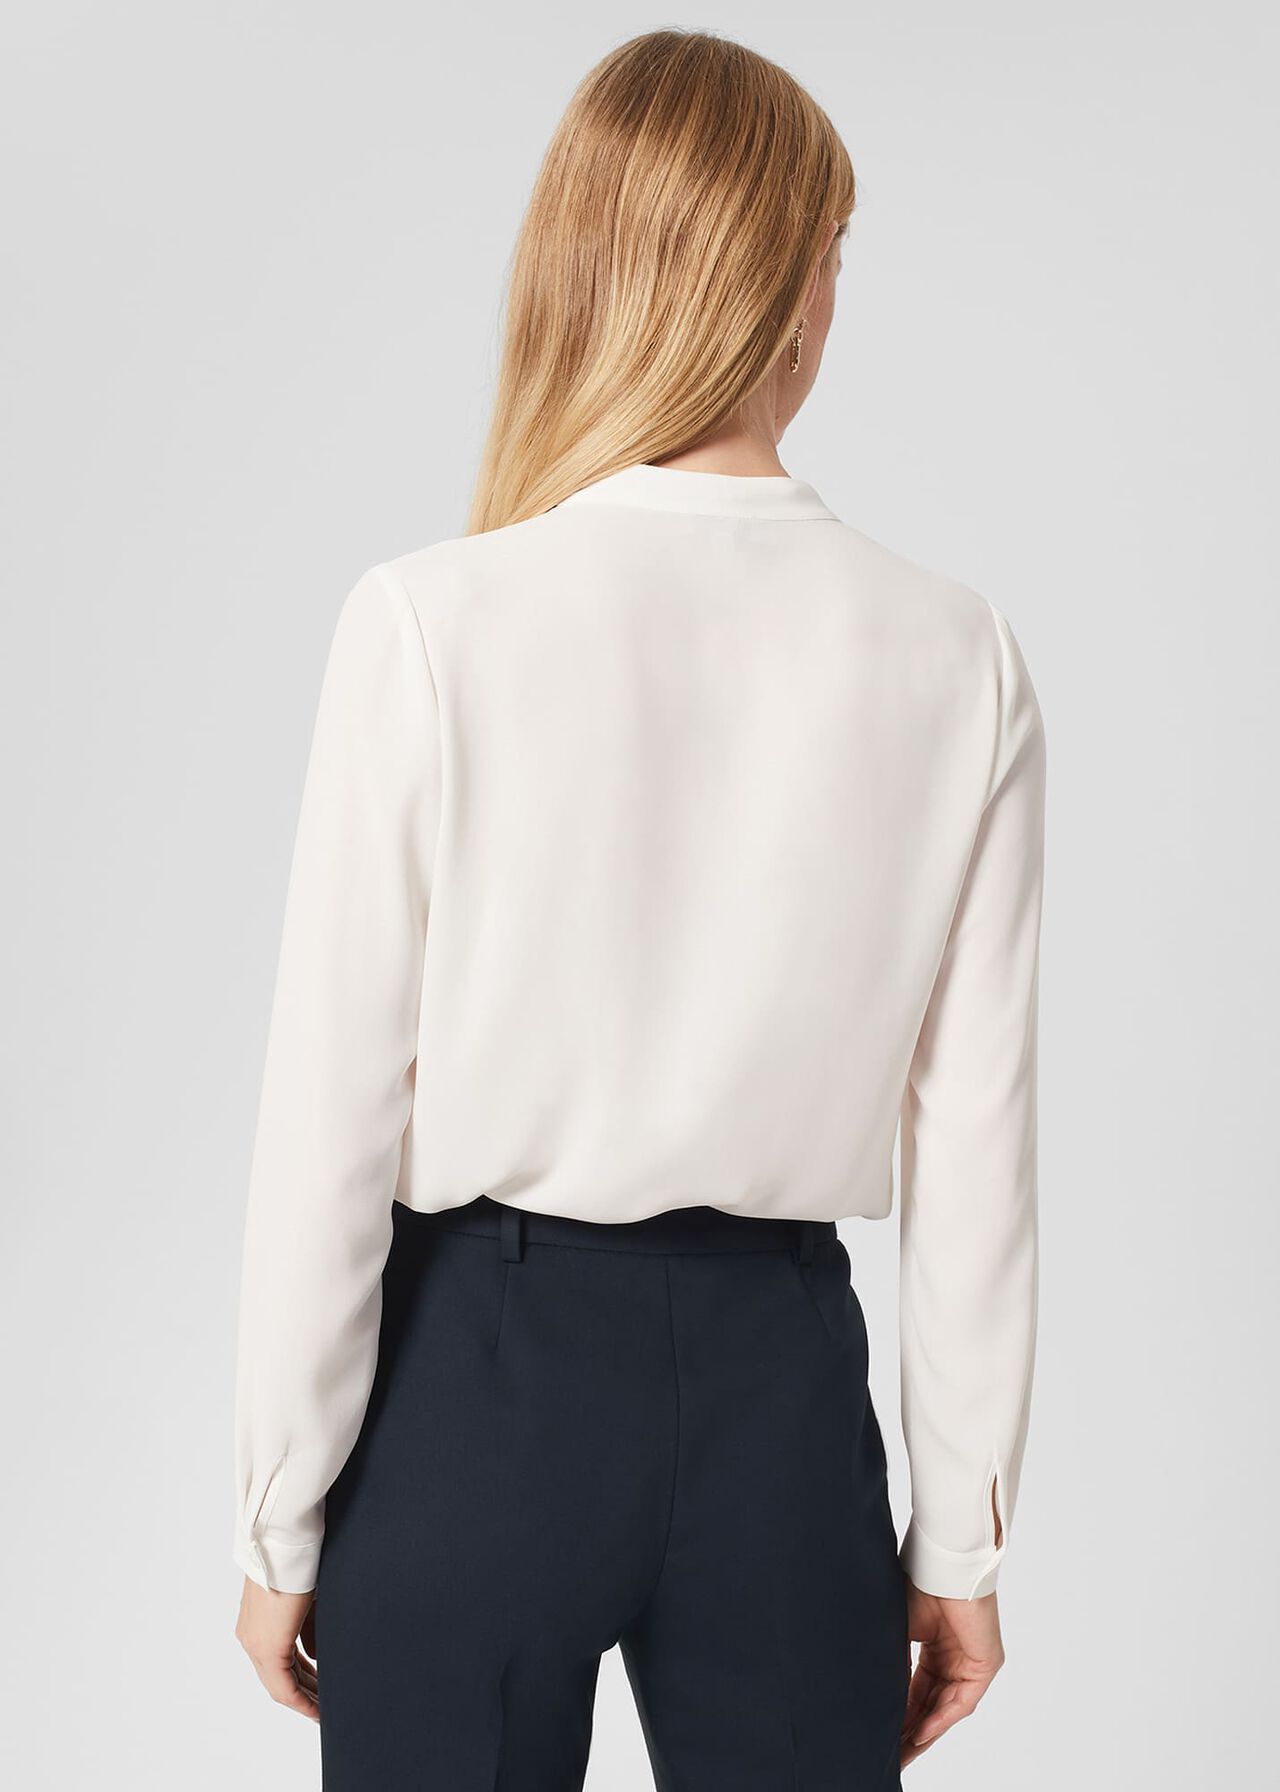 Connie Blouse, Ivory, hi-res